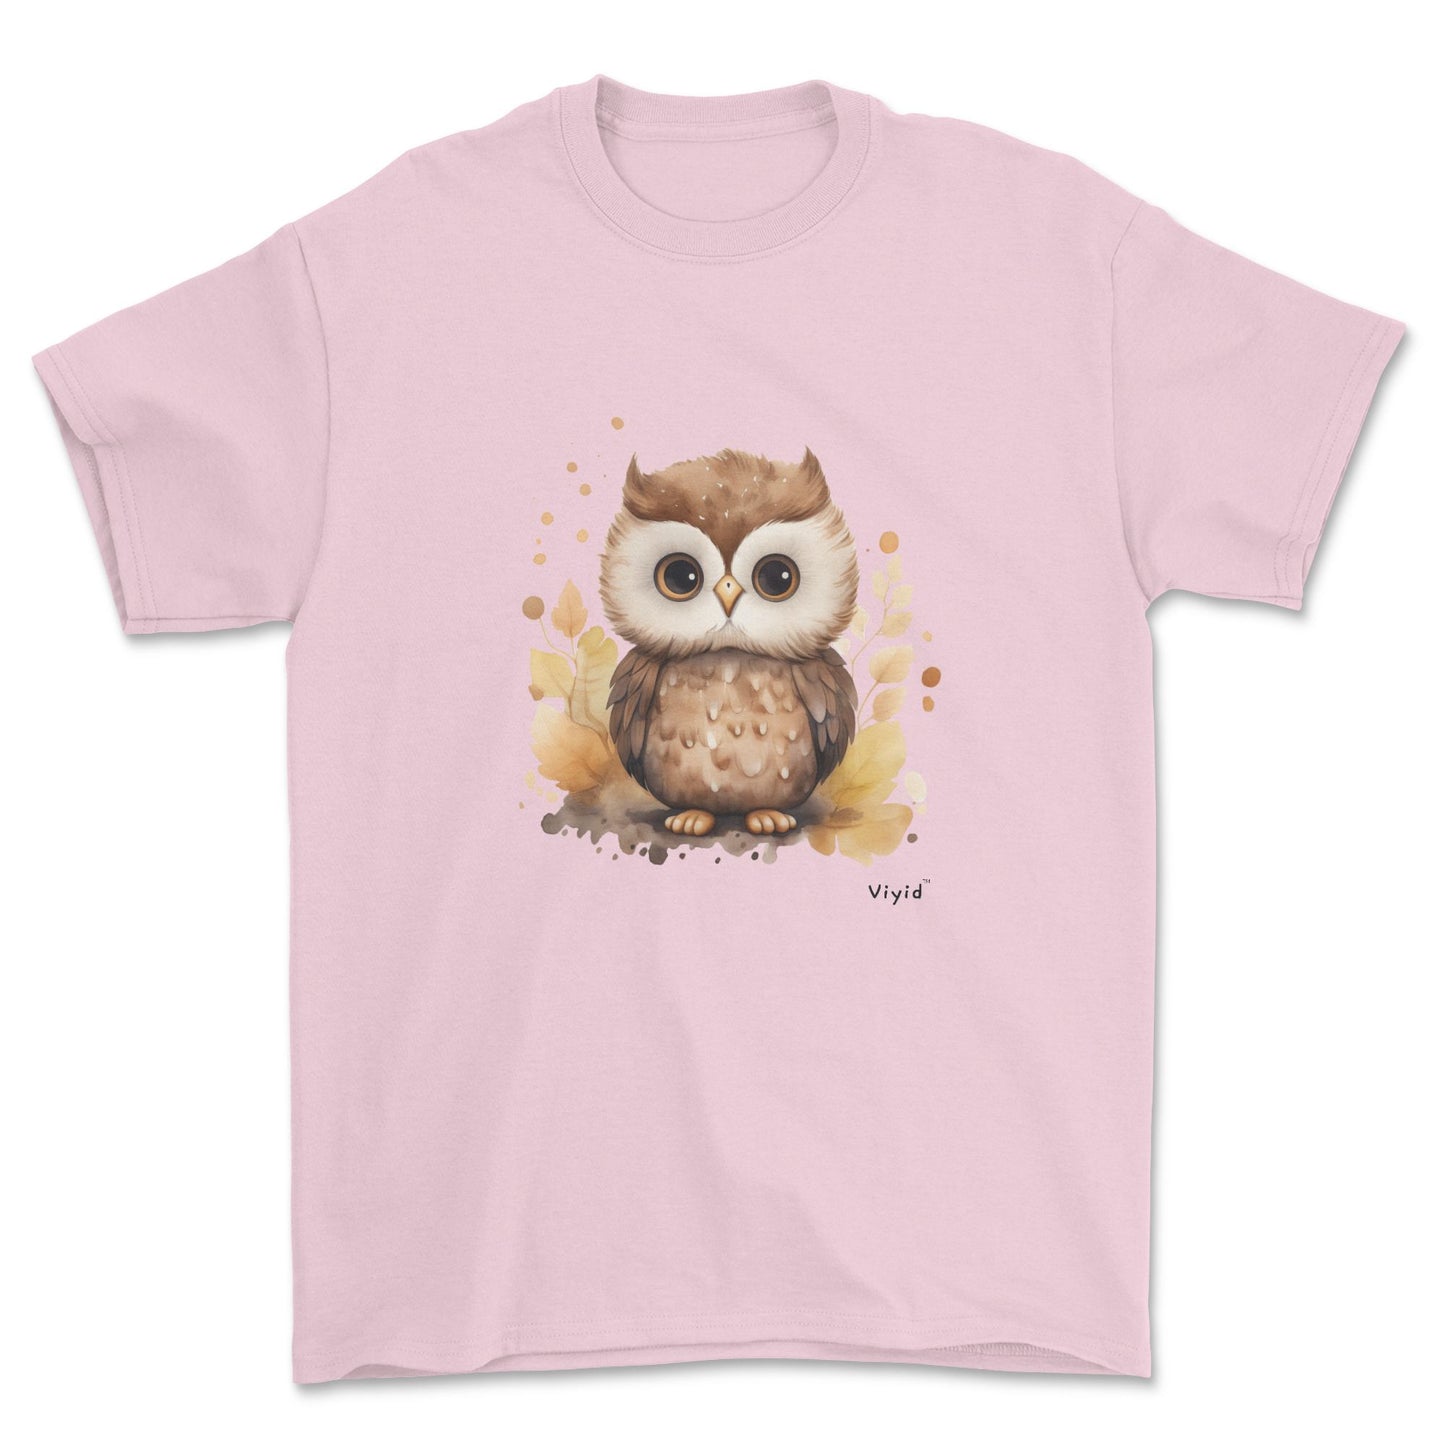 nocturnal owl youth t-shirt light pink